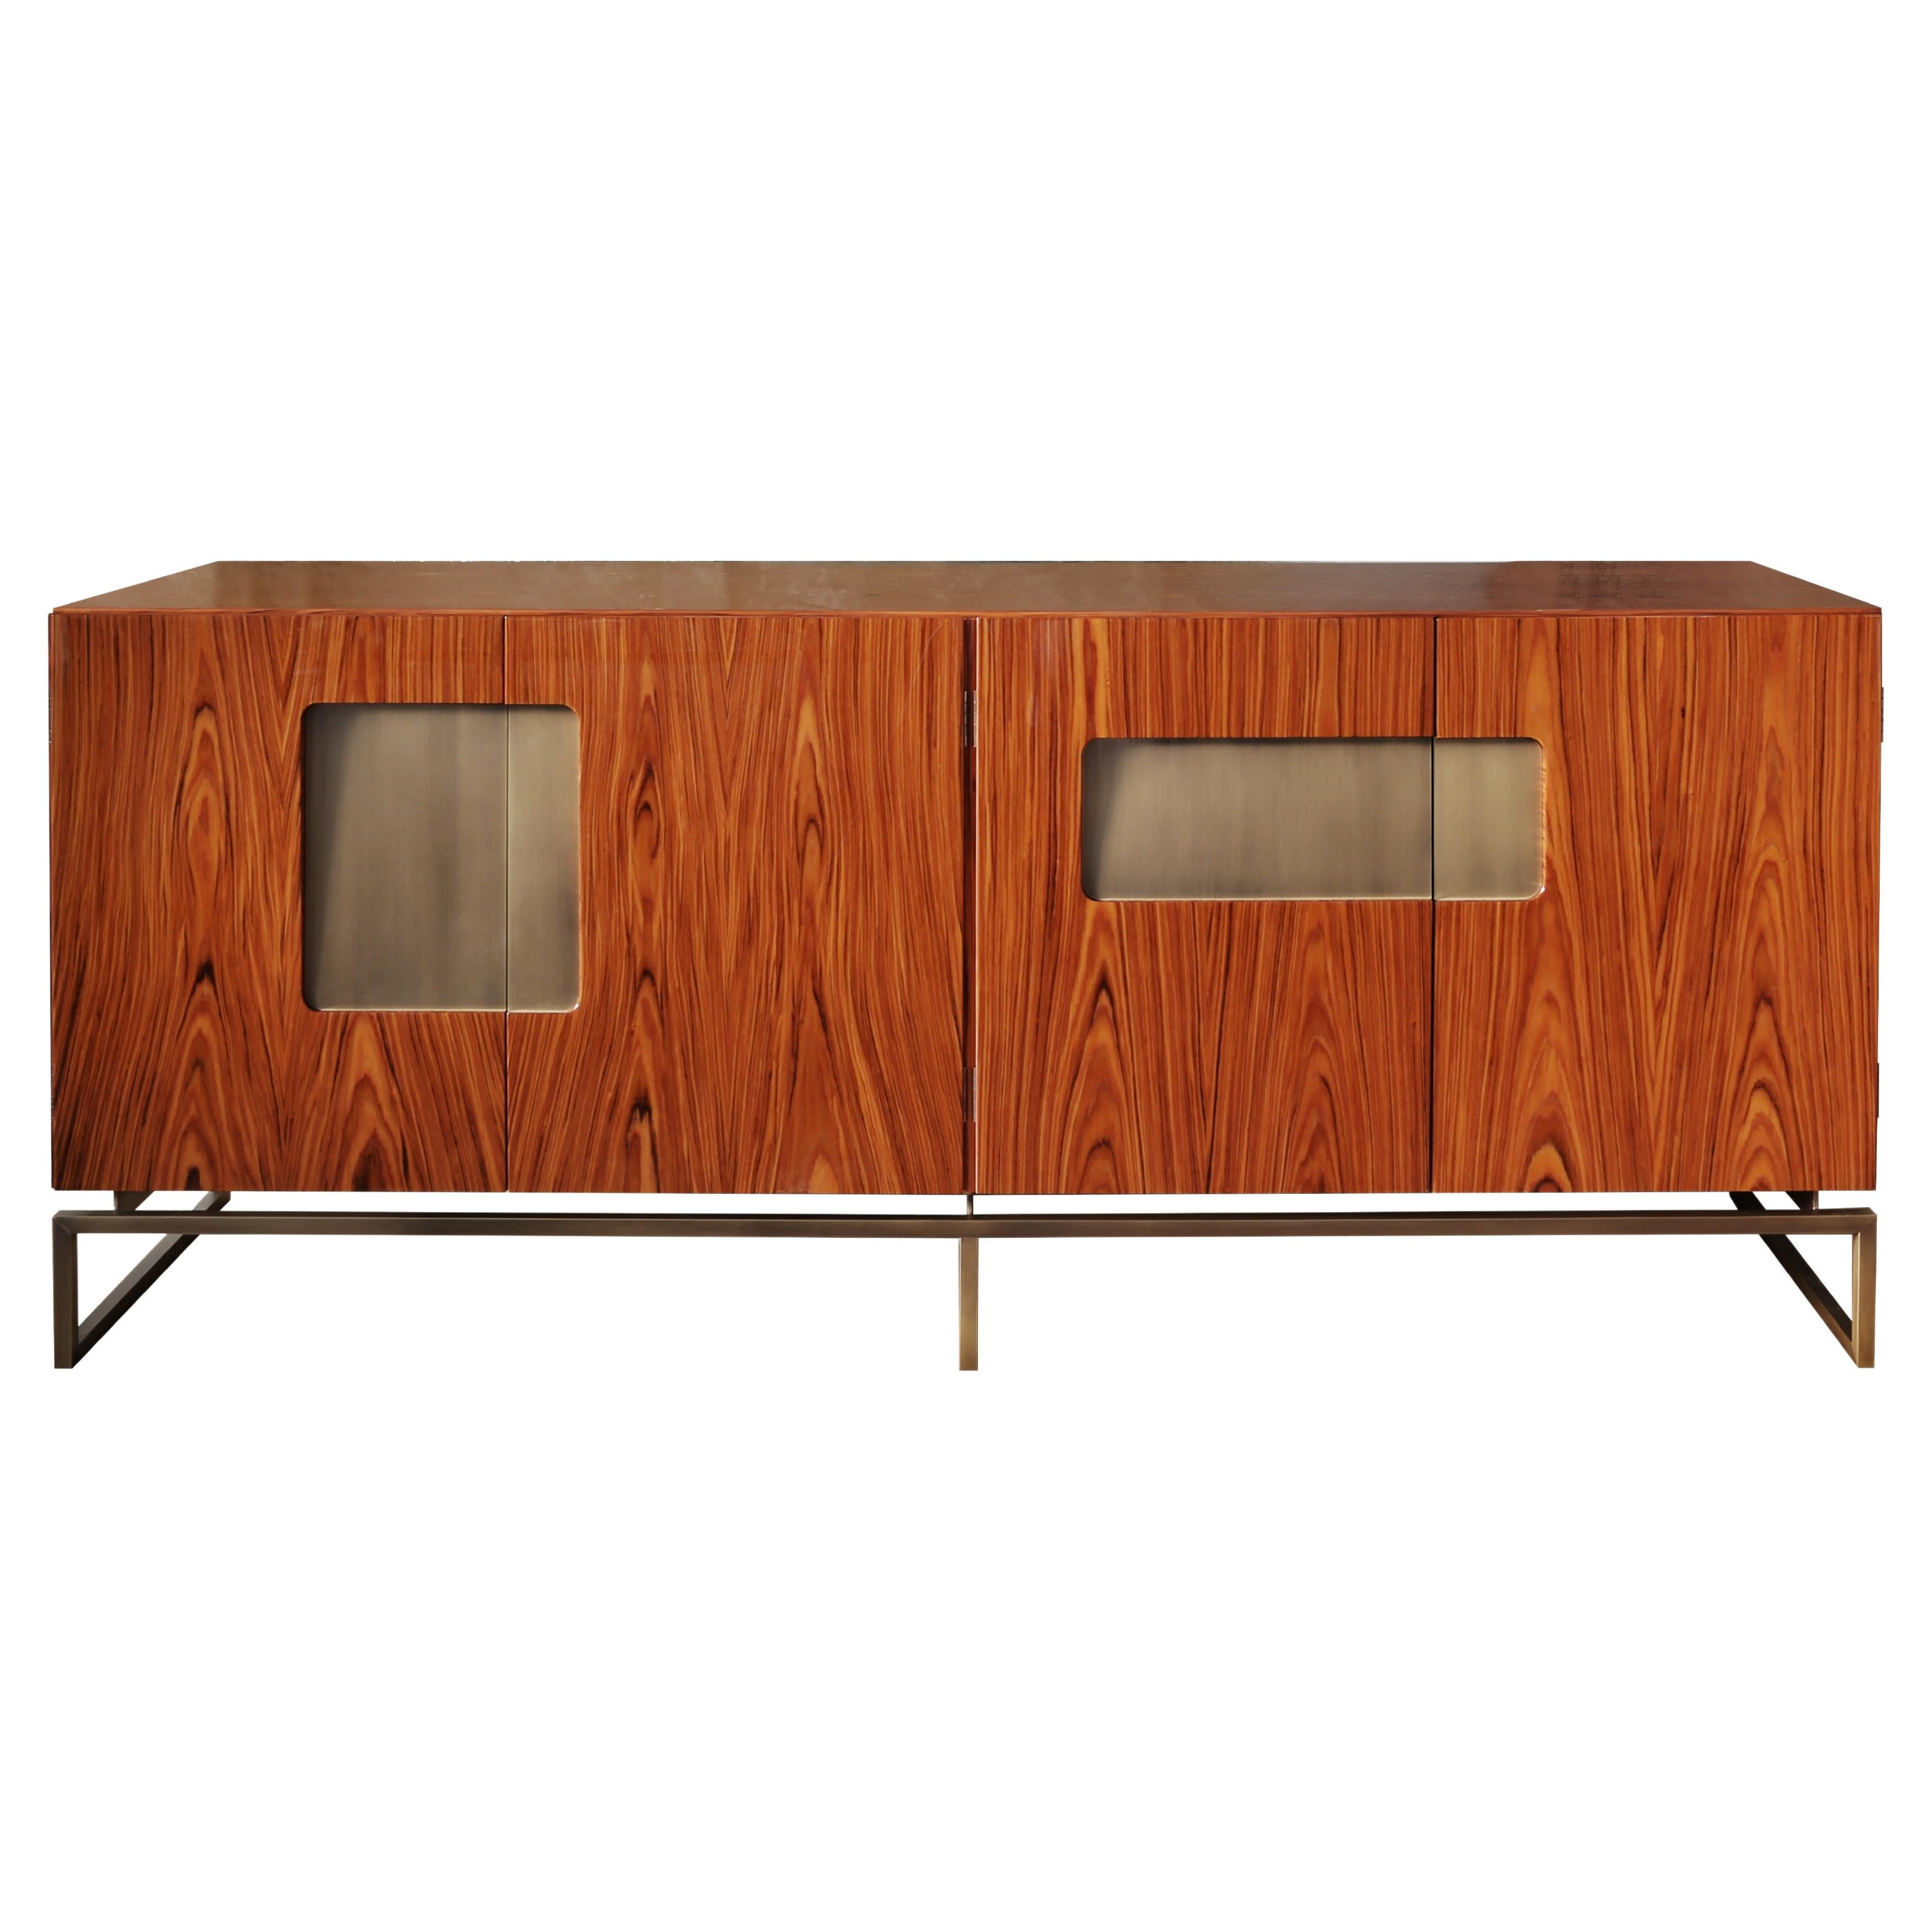 Giorgio, the Elegant Cabinet Finished in Wood Veneer with Rosewood Effect